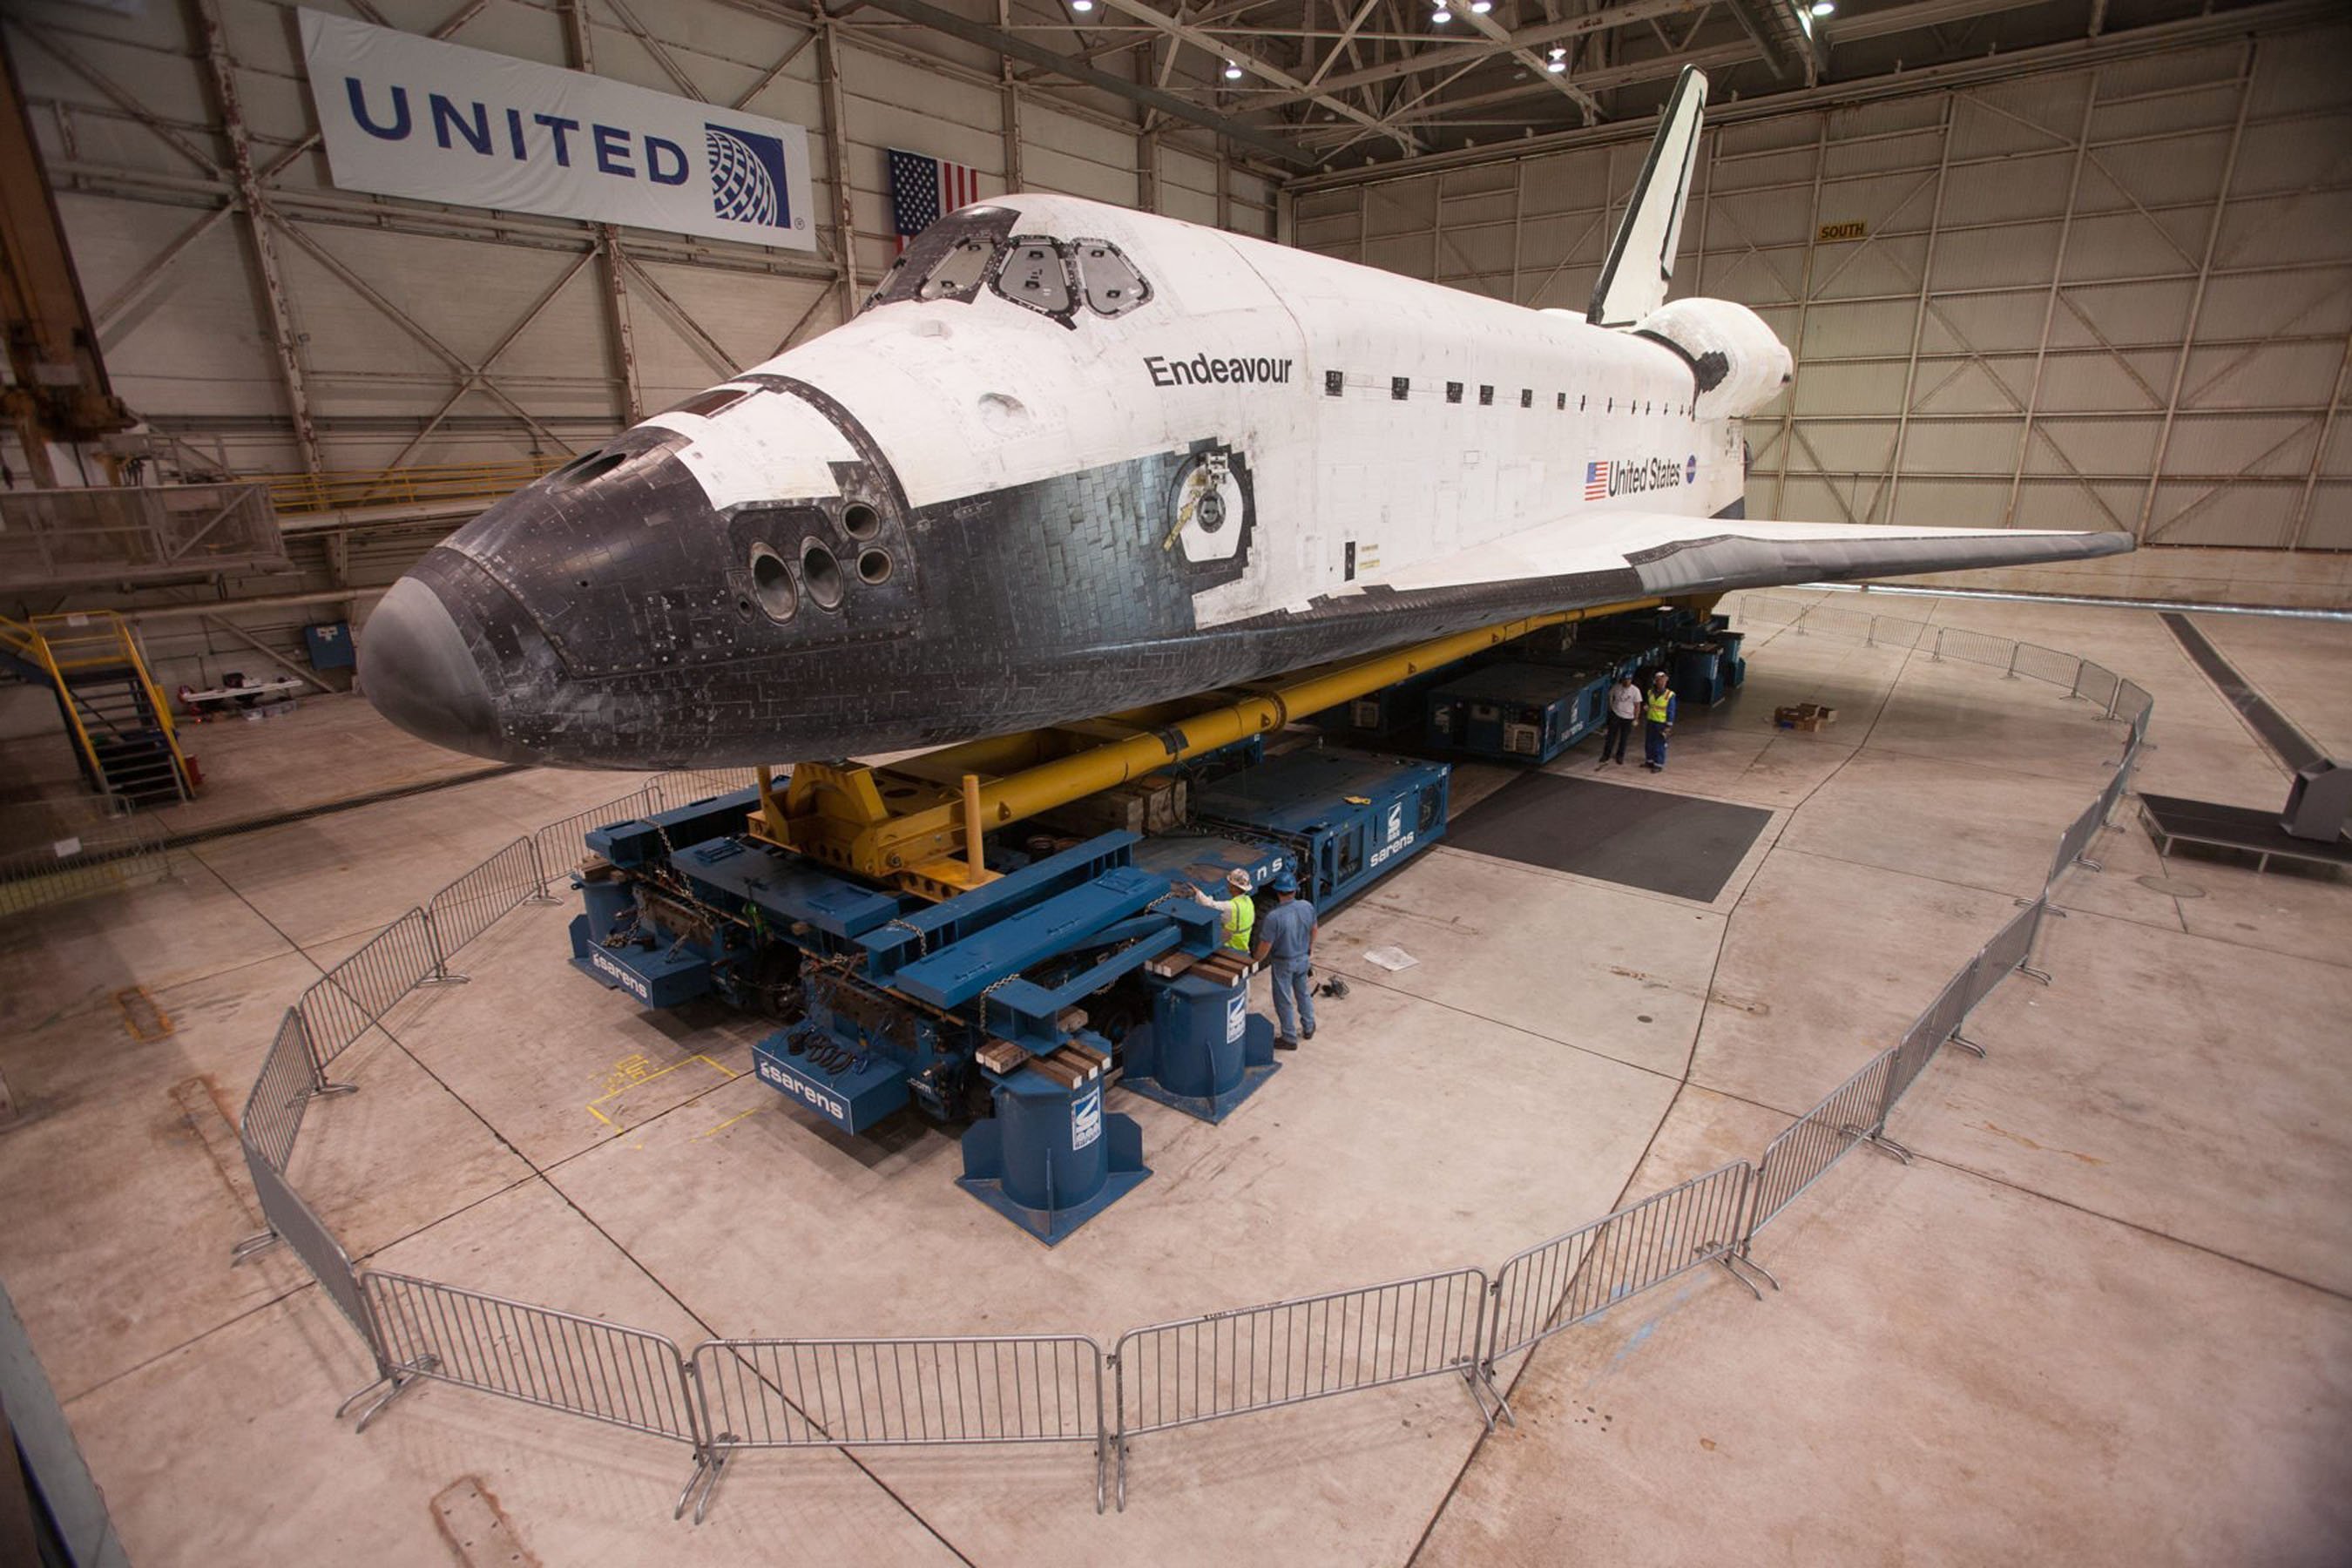 space shuttle endeavour facts